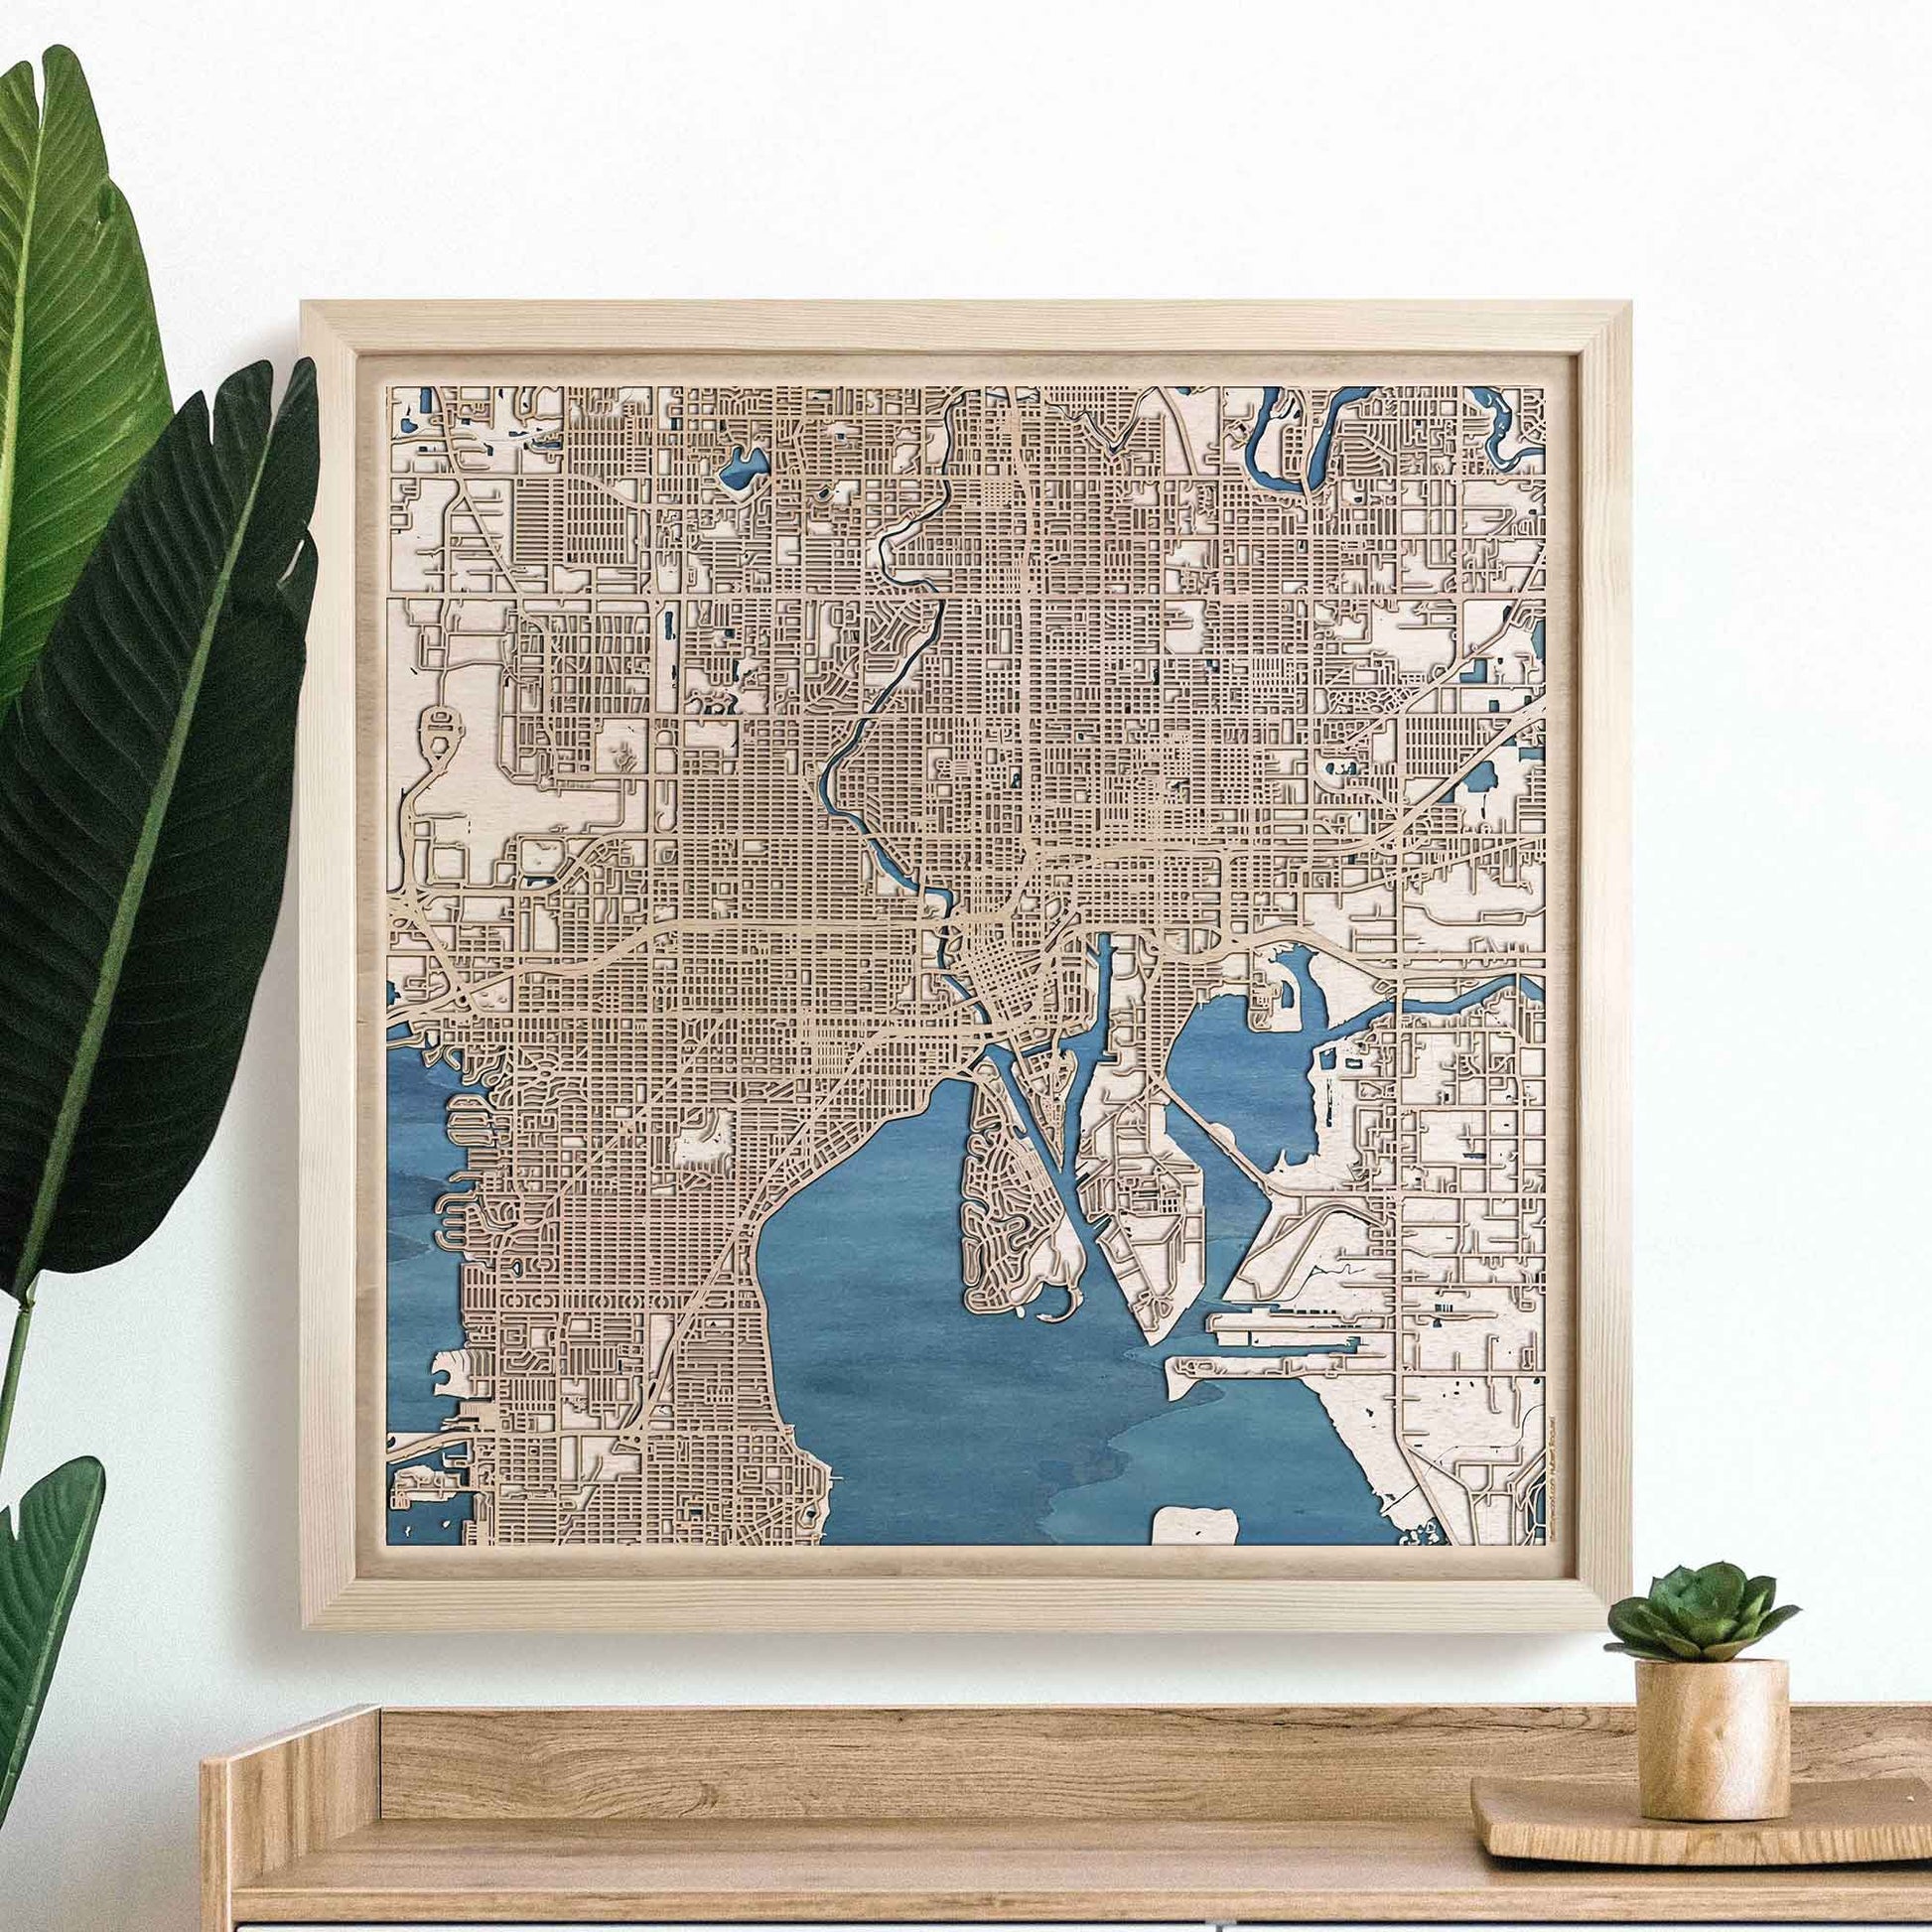 Tampa Wooden Map by CityWood - Custom Wood Map Art - Unique Laser Cut Engraved - Anniversary Gift